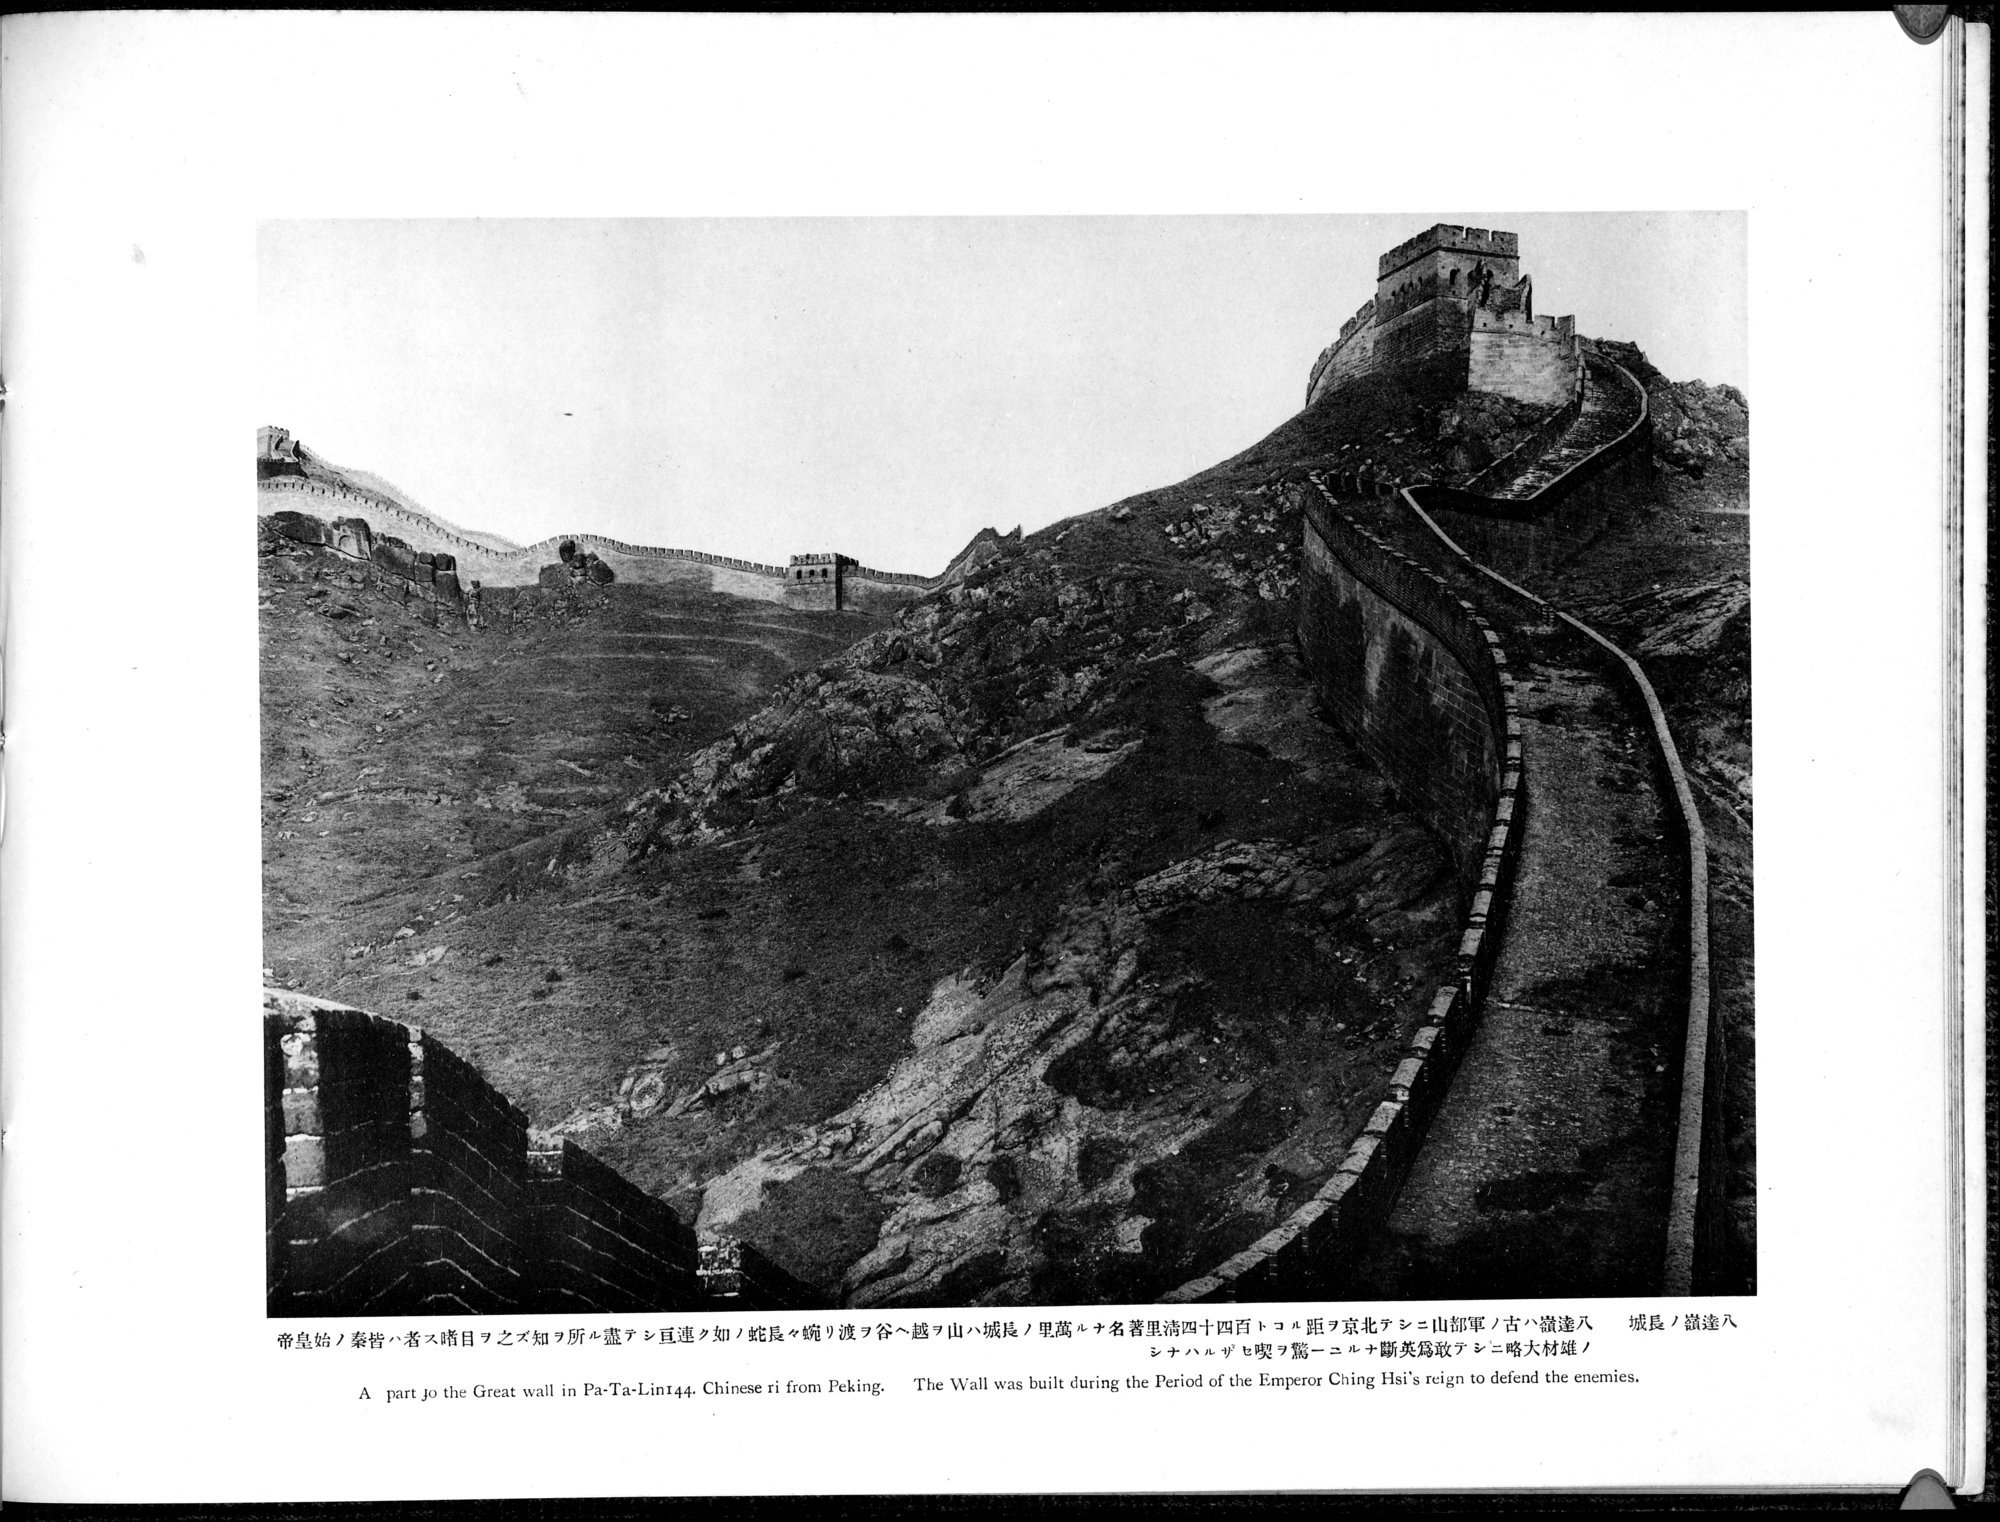 Views and Custom of North China : vol.1 / Page 189 (Grayscale High Resolution Image)